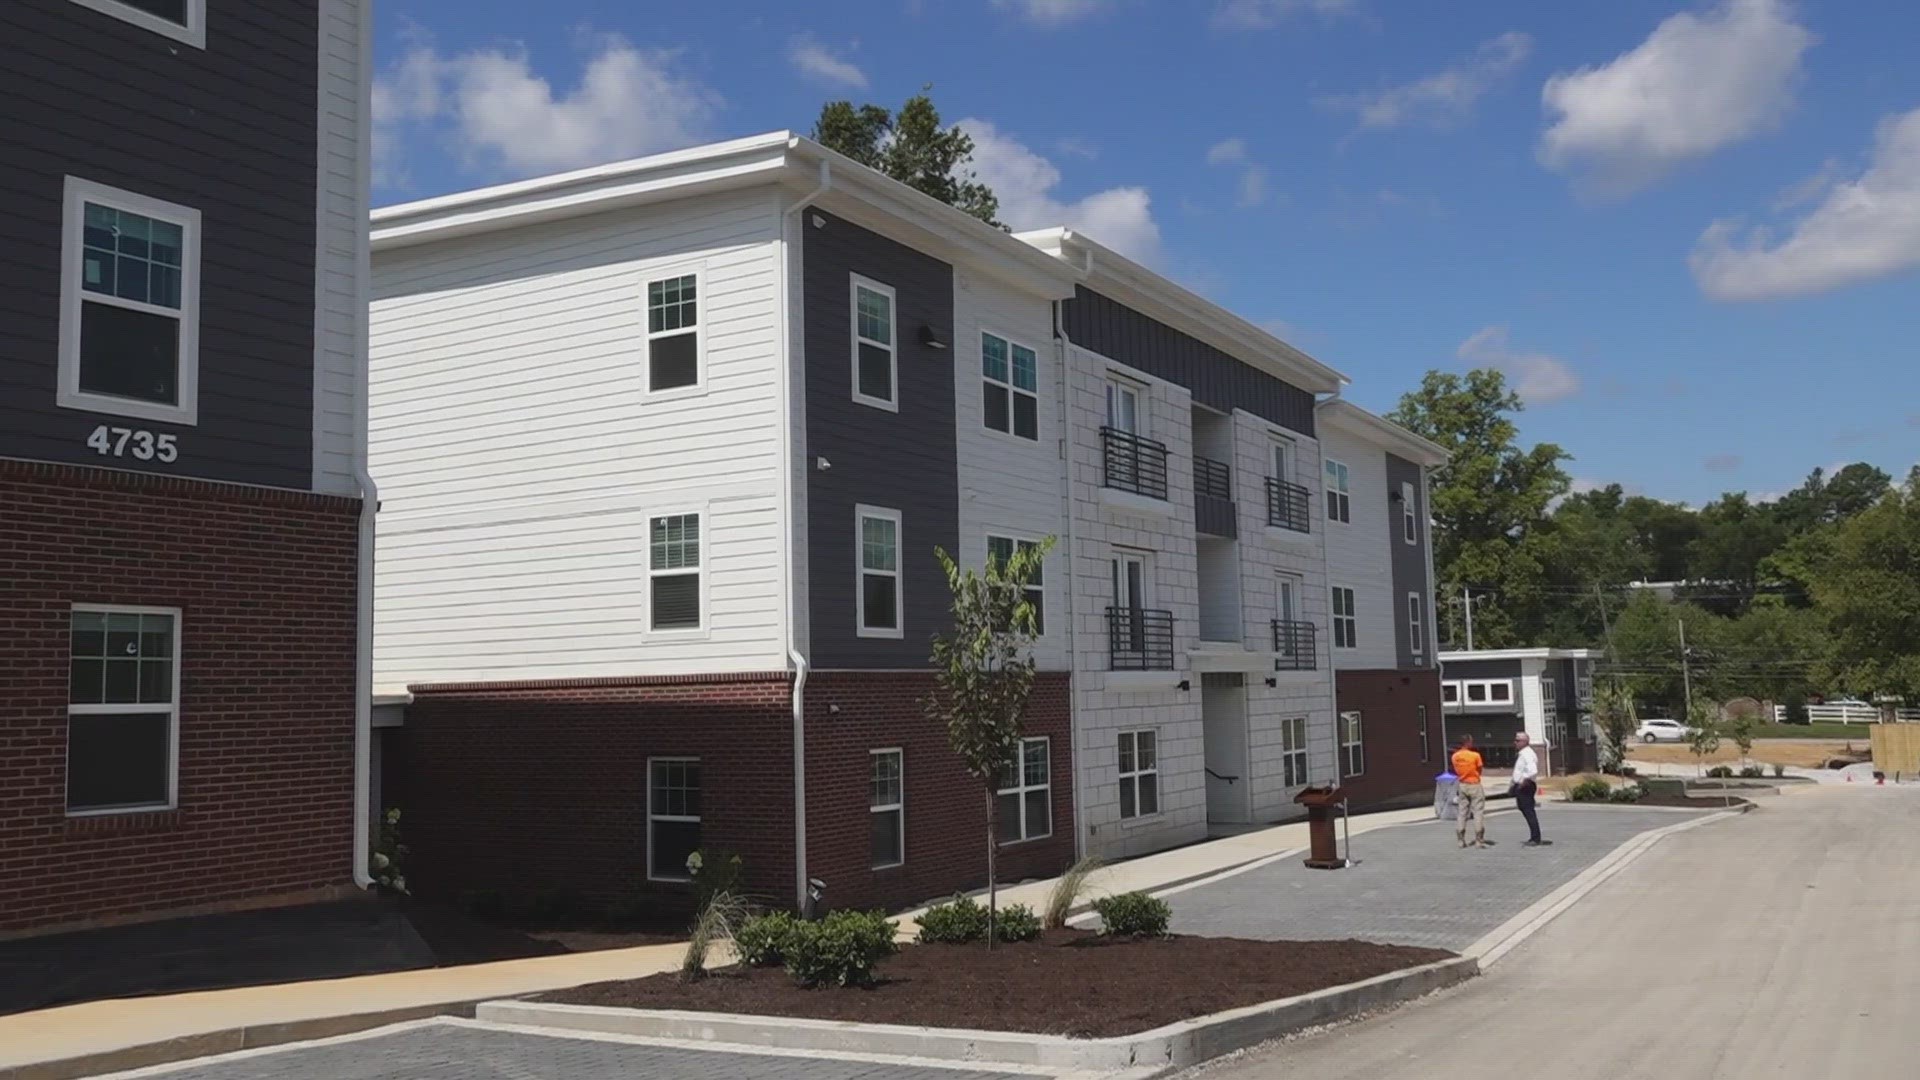 Inskip Flats features units that have either two or three bedrooms. It was funded by the Affordable Development Fund from the City of Knoxville and private investors